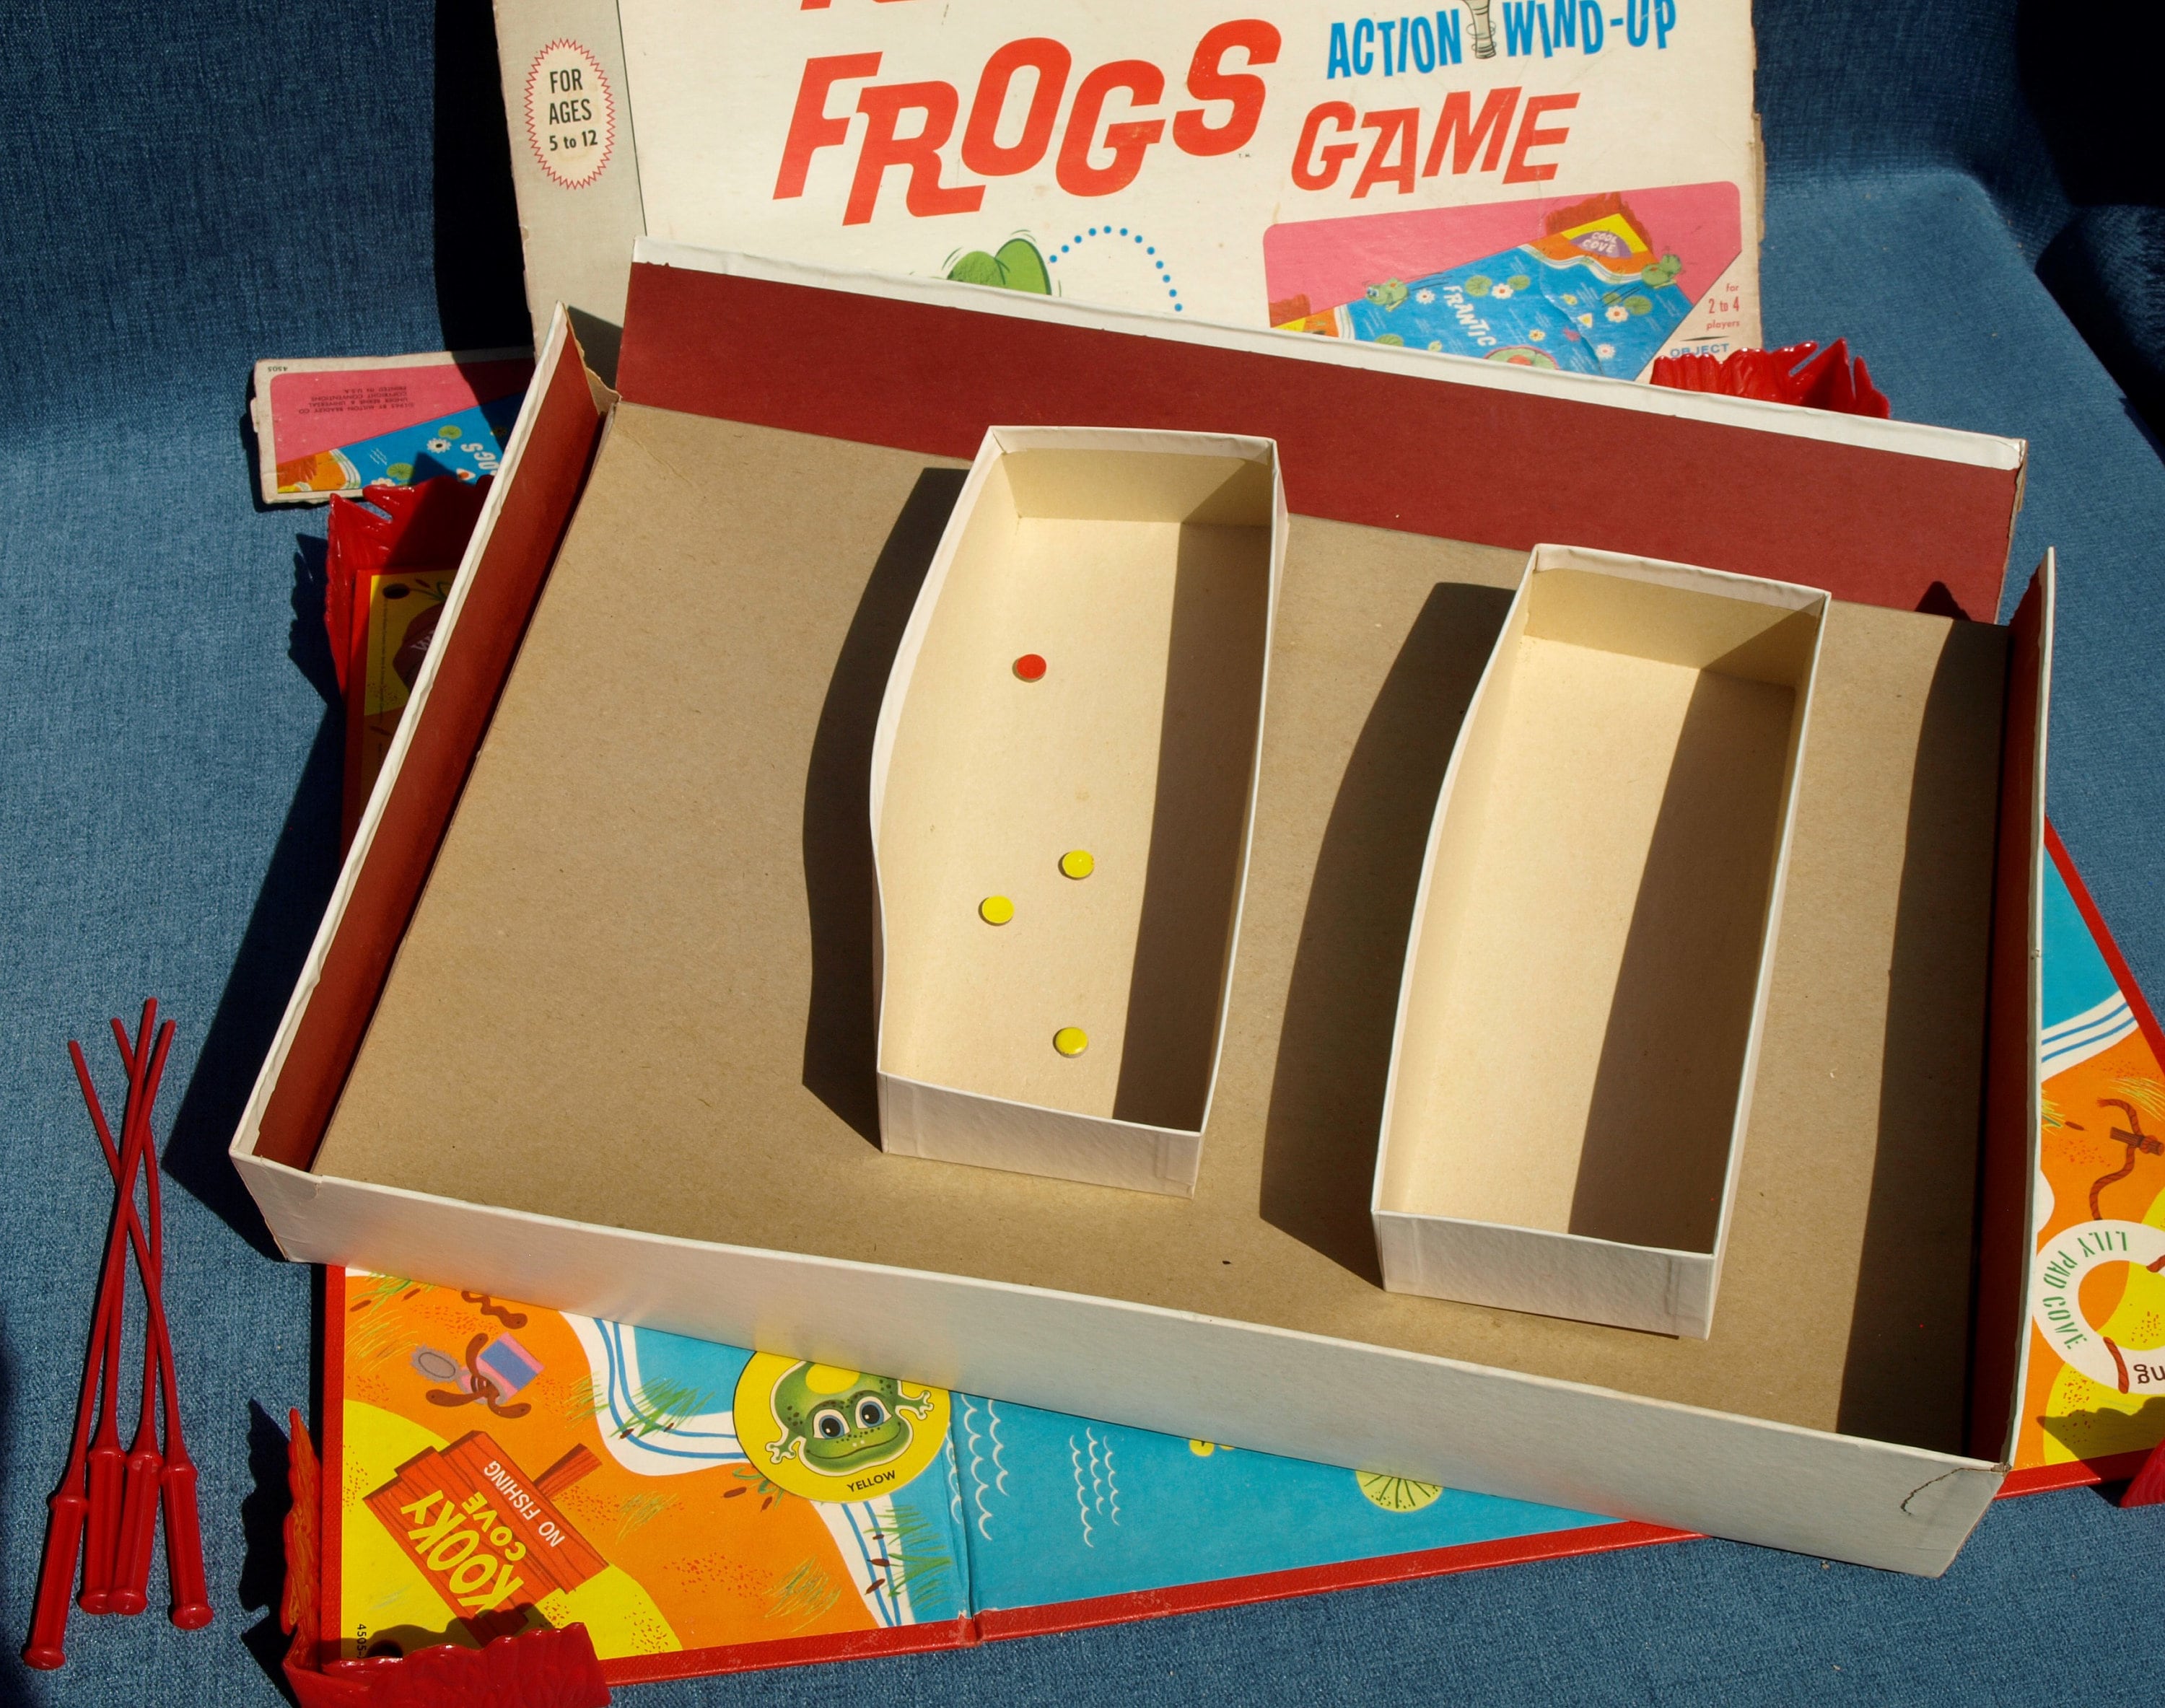 Vintage Frantic Frogs Action Wind up Game by Milton Bradley No